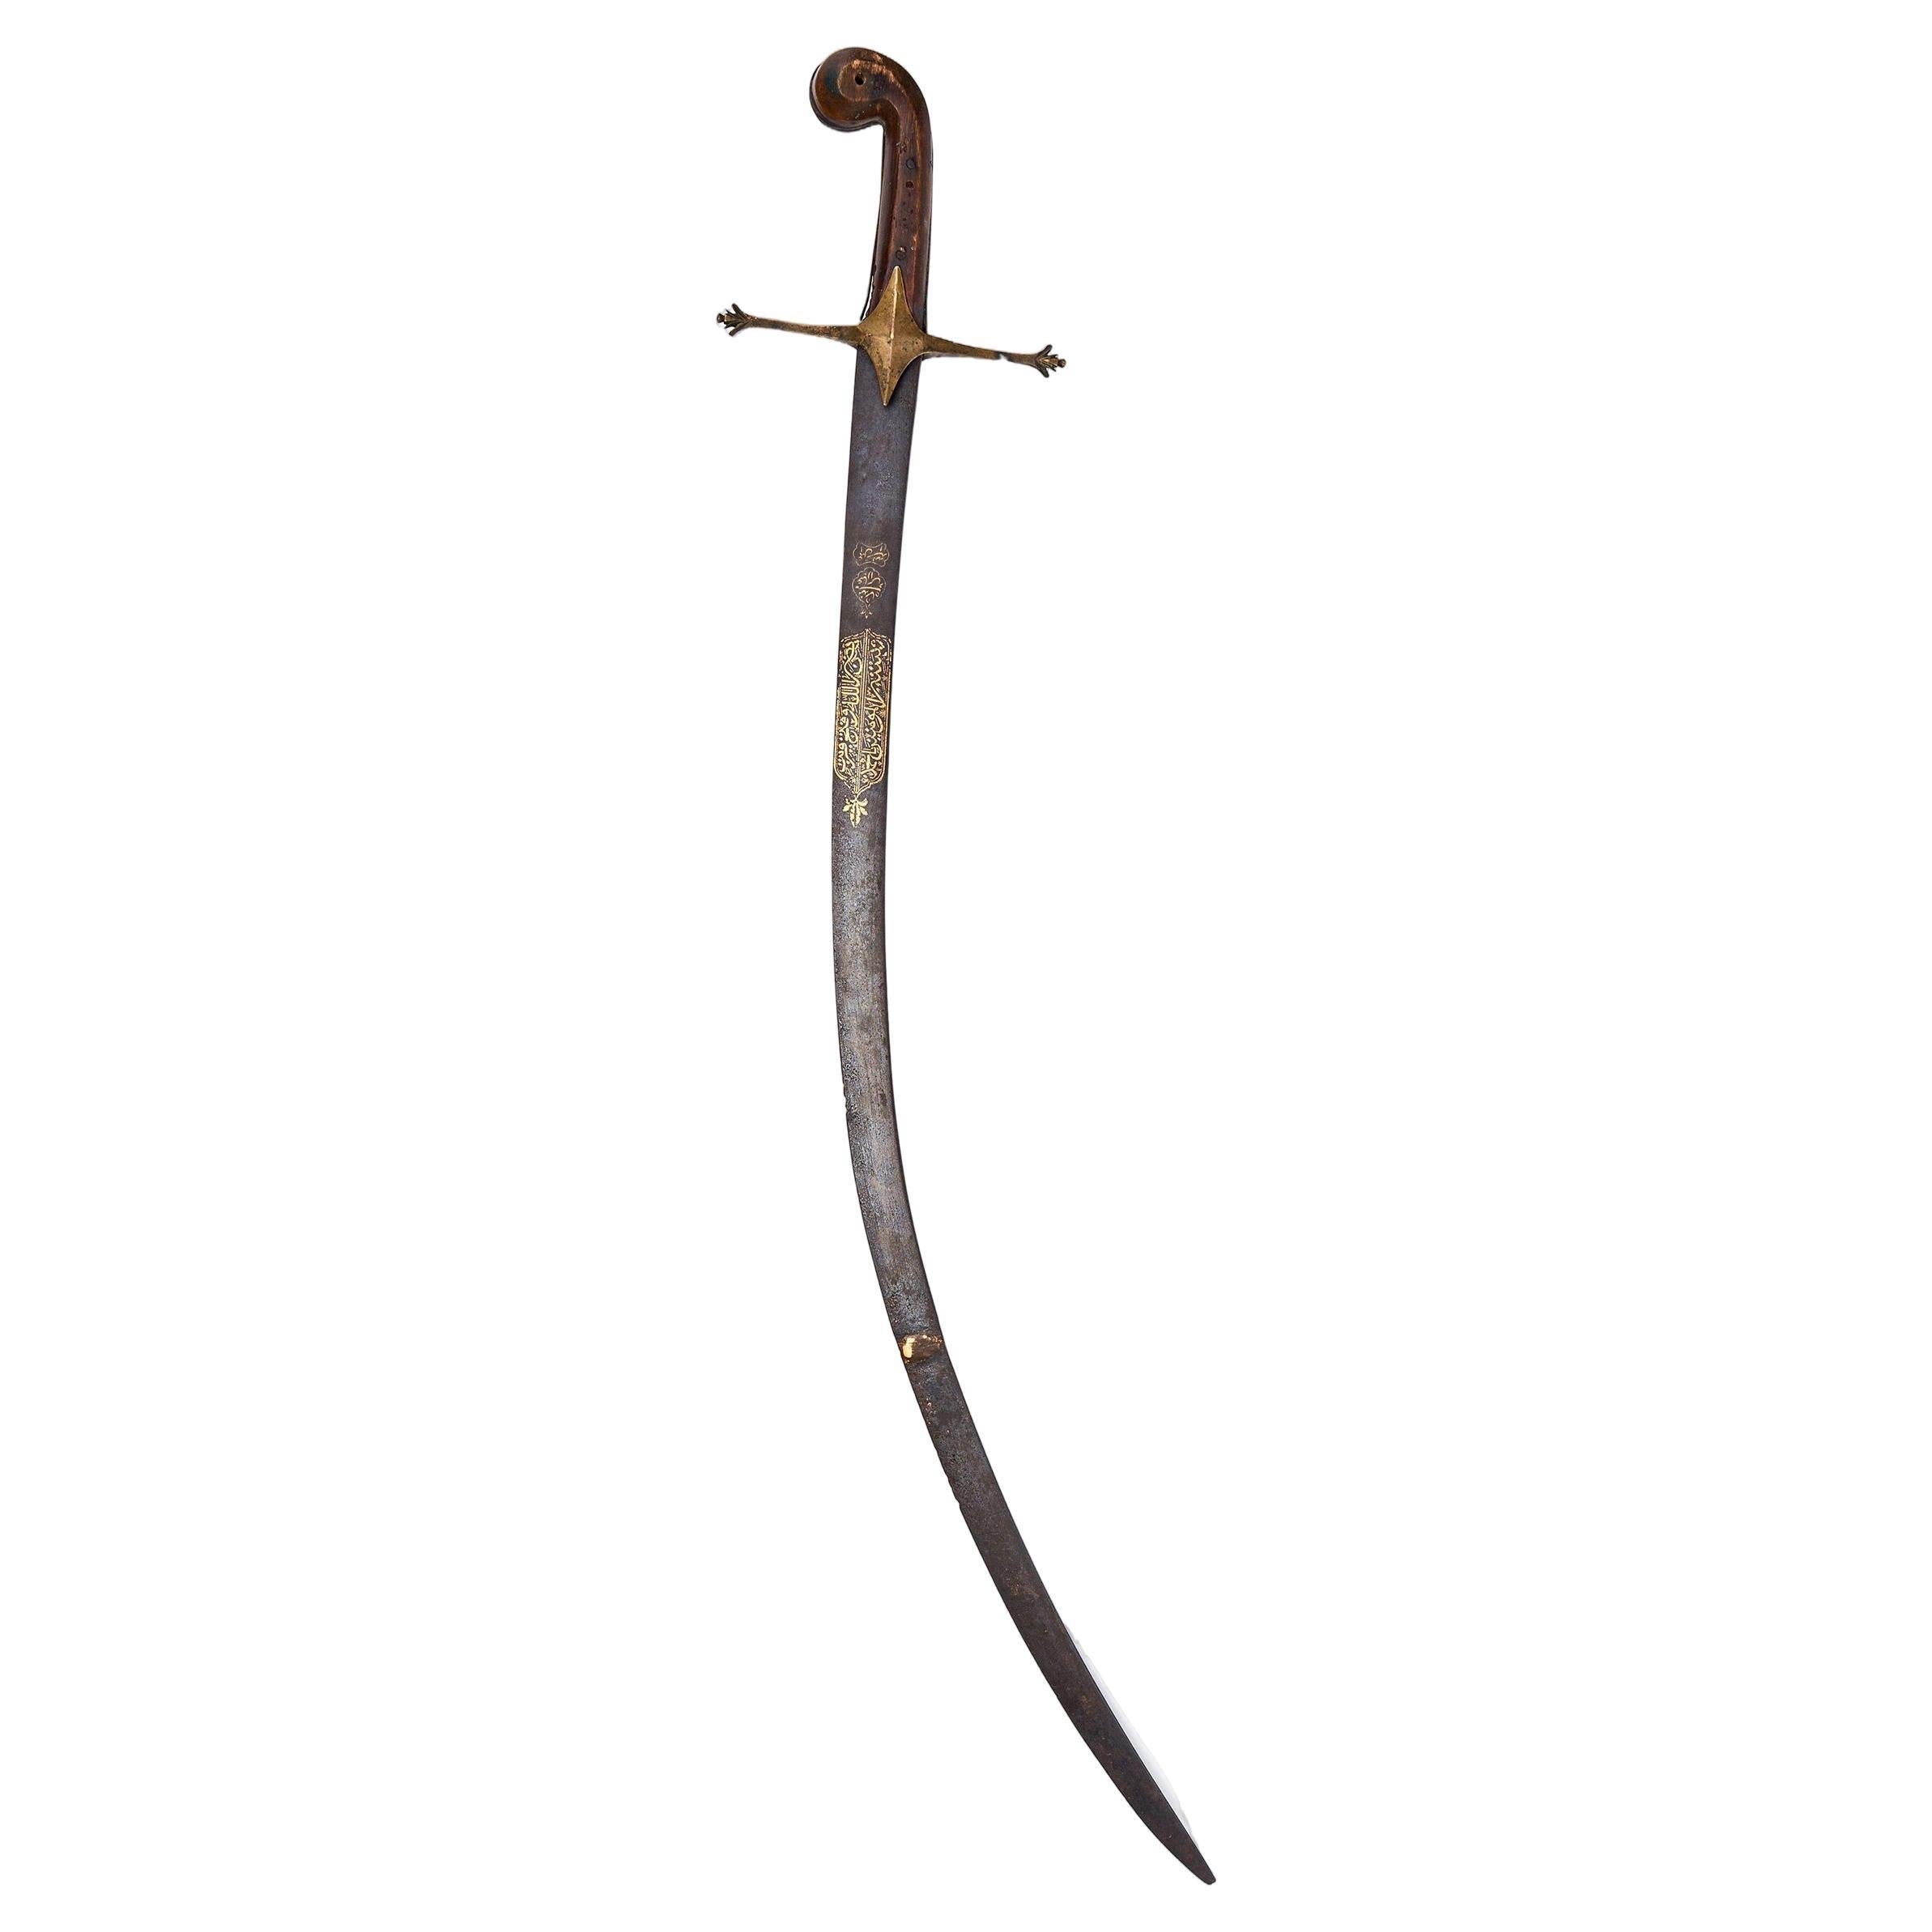 A Jawhar Sword With Calligraphy, By Asad Allah, Period Of Shah Abbas For Sale